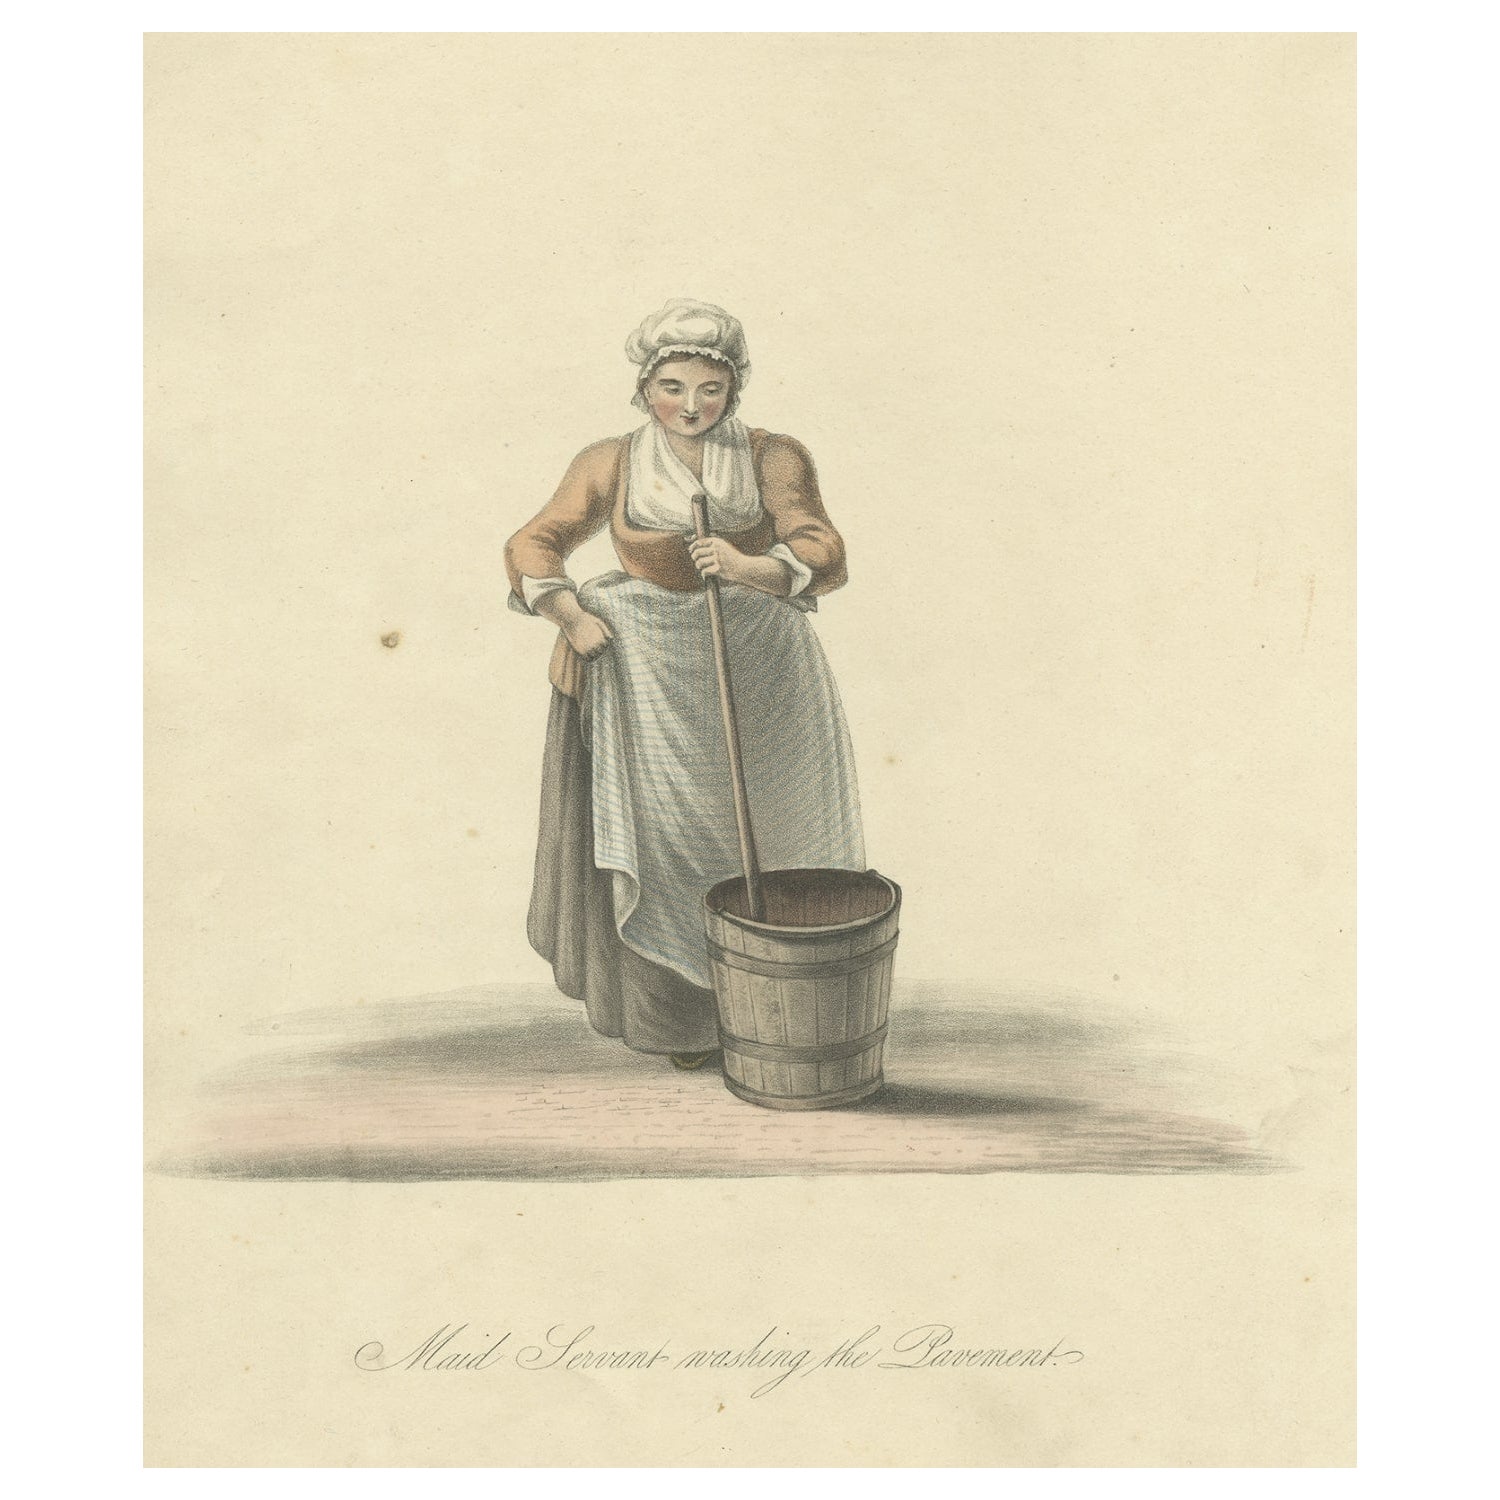 Old Hand-Colored Print of a Maid Servant in Holland, Washing the Pavement, 1817 For Sale